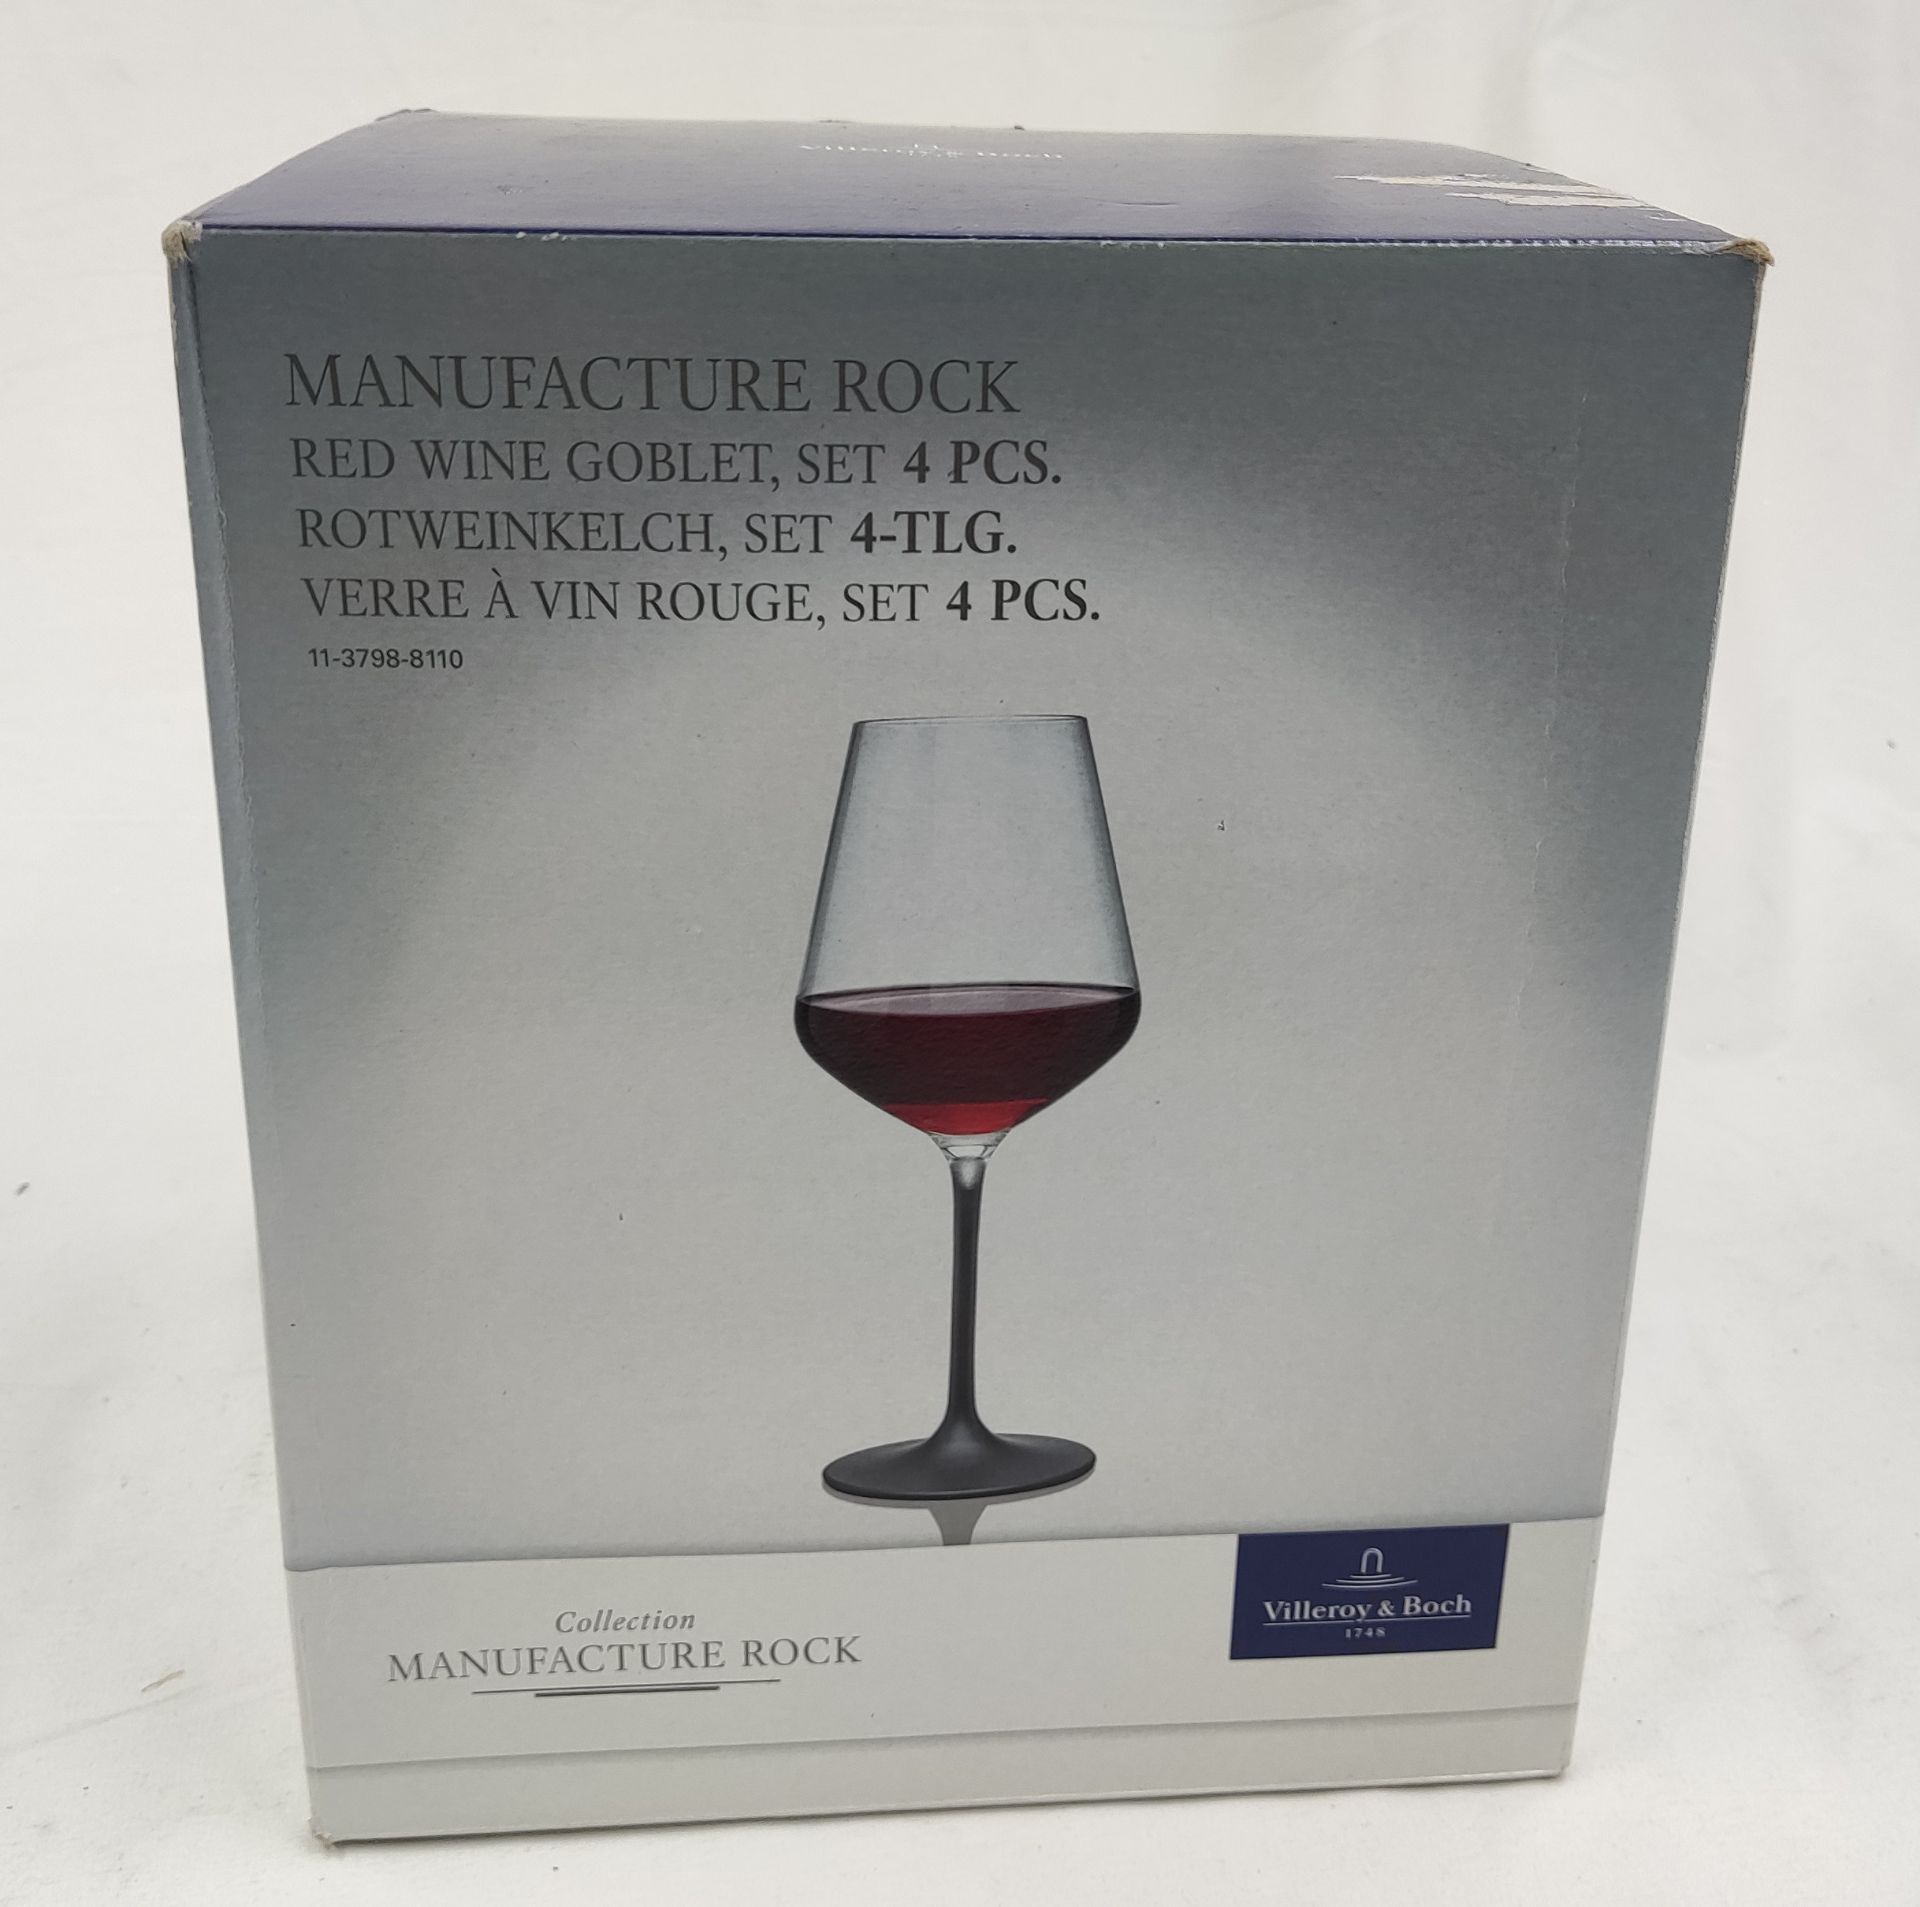 1 x VILLEROY & BOCH Manufacture Rock Red Wine Goblet Set, 4 Piece - New And Boxed - RRP £66 - Ref: - Image 7 of 12